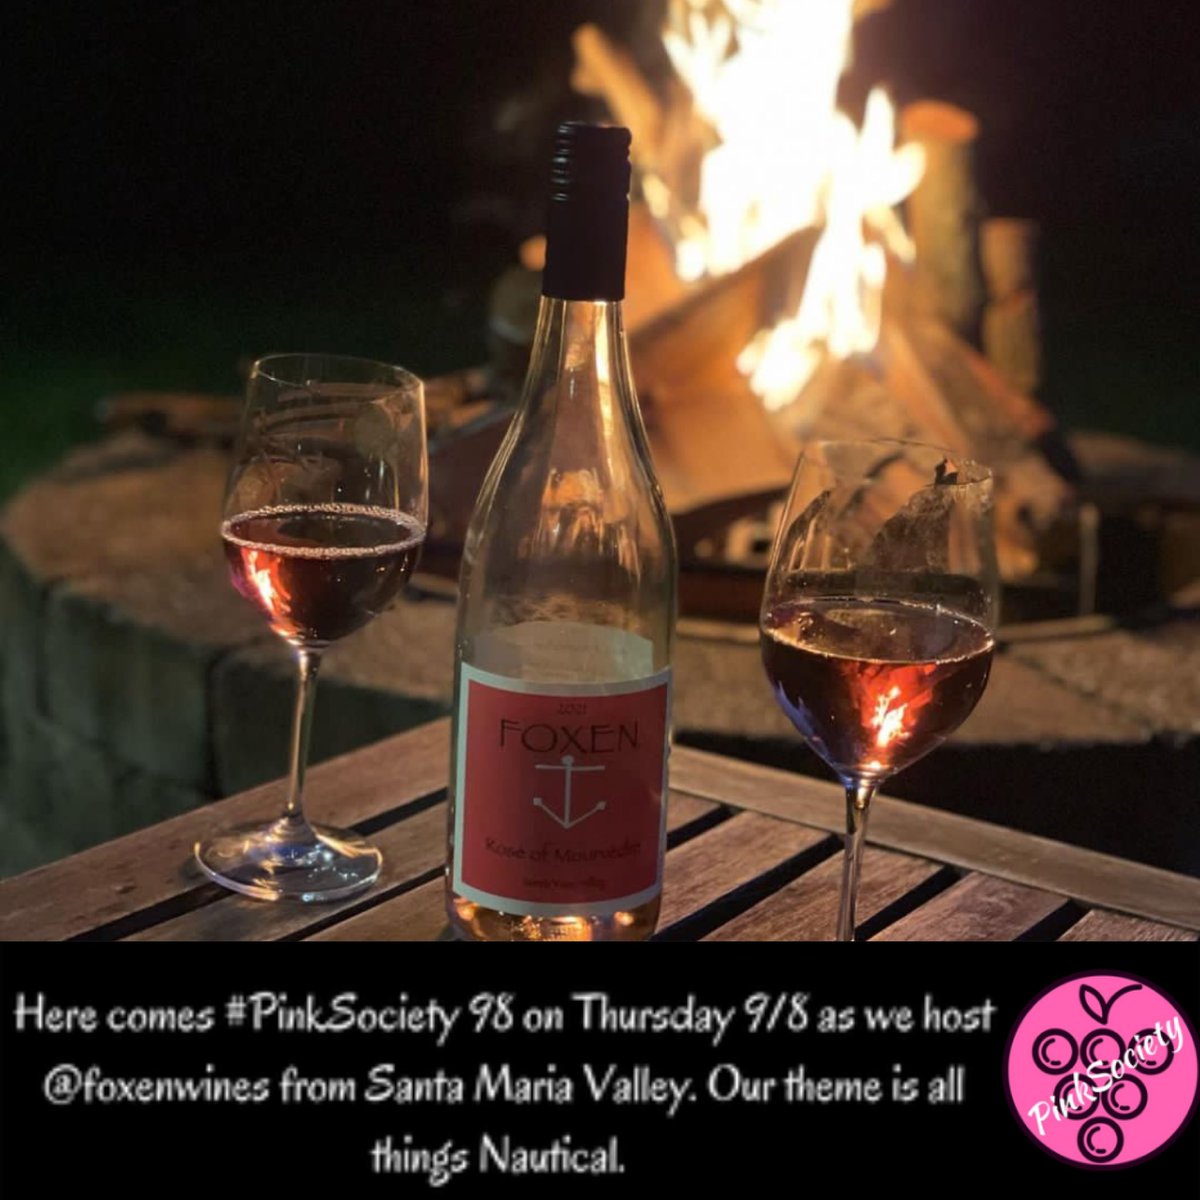 Here comes #PinkSociety 98 on Thursday 9/8 as we host @foxenwines from Santa Maria Valley. Our theme is all things Nautical. ONE WEEK FROM TODAY! @boozychef @jflorez @WineCheeseFri @SideHustleWino @G12Rocco @SipWatchTweet @rr_pirate @DeBodene @i_stephie @CharlesMcCool @f